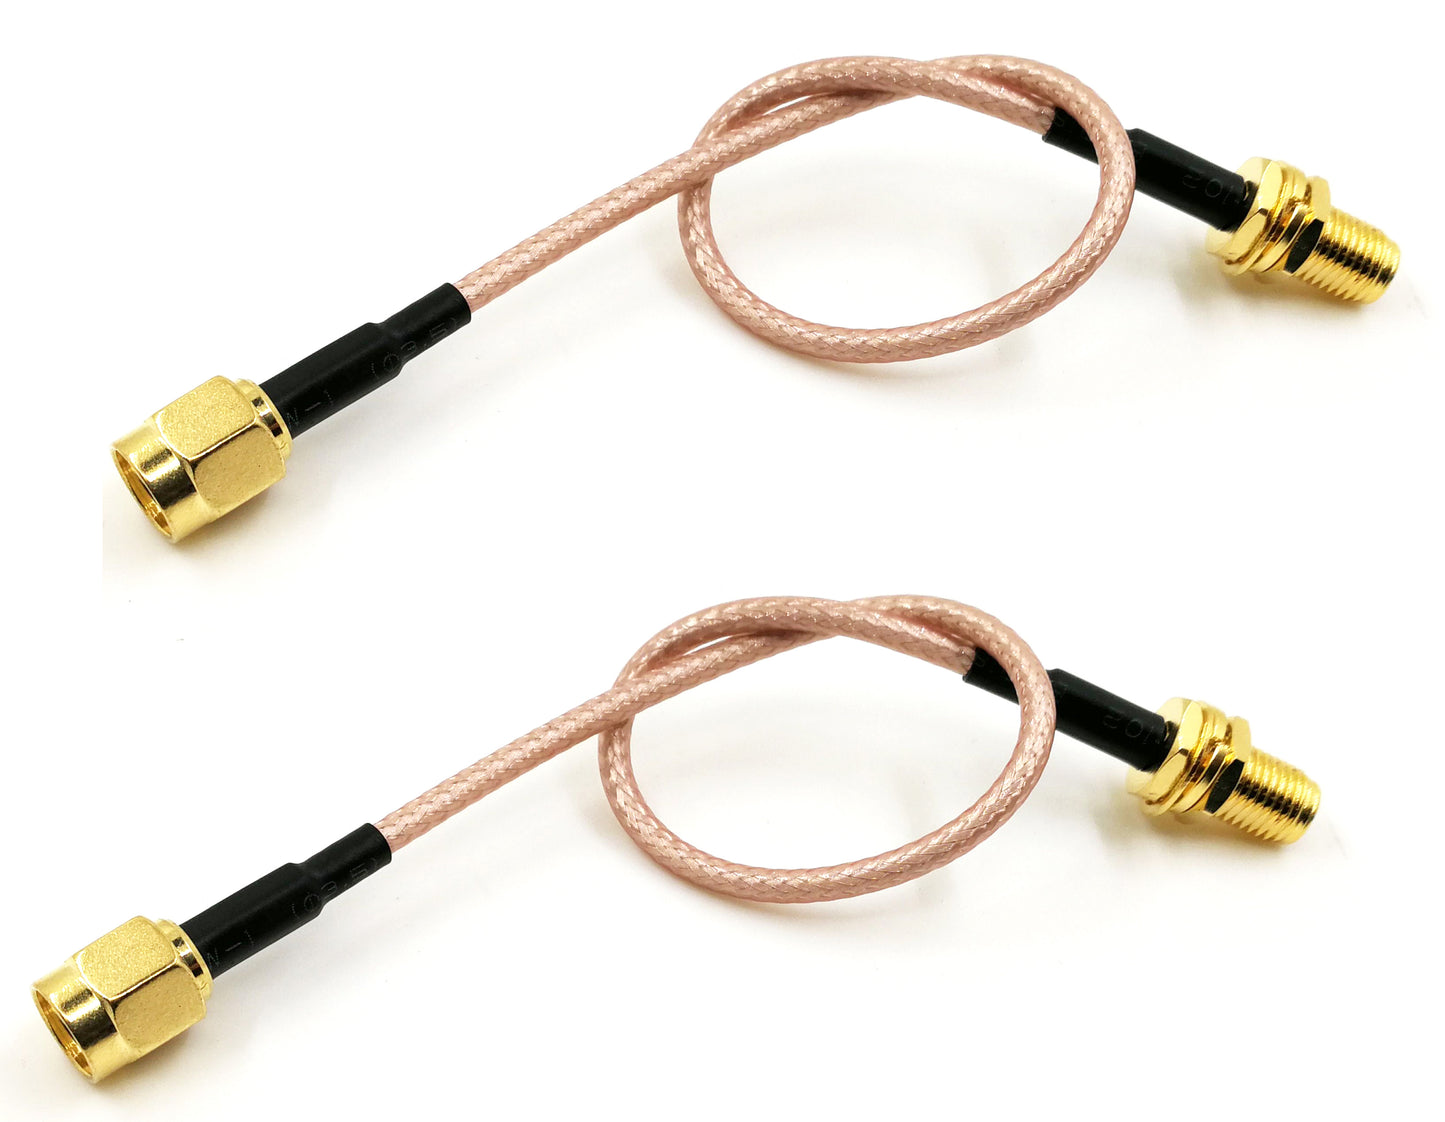 Pack of 2 RF RG316 RP-SMA Male to RP-SMA Female Nut Bulkhead Crimp Antenna Coaxial Low Loss Cable…